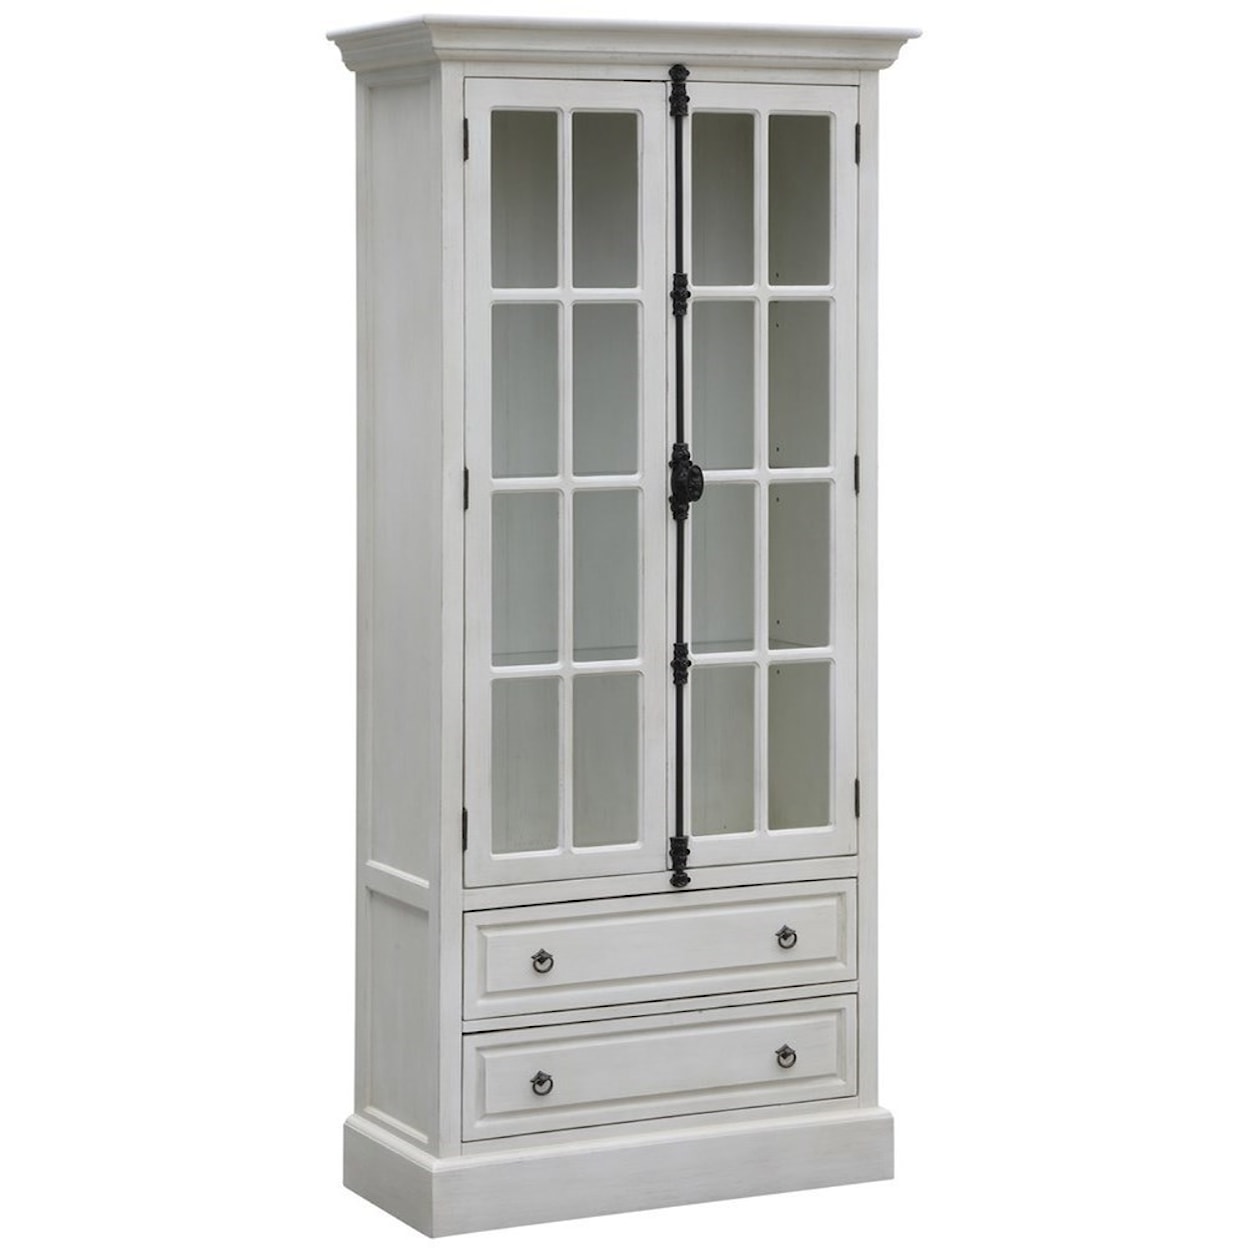 Crestview Collection Accent Furniture Coventry White Oak 2 Door Curio